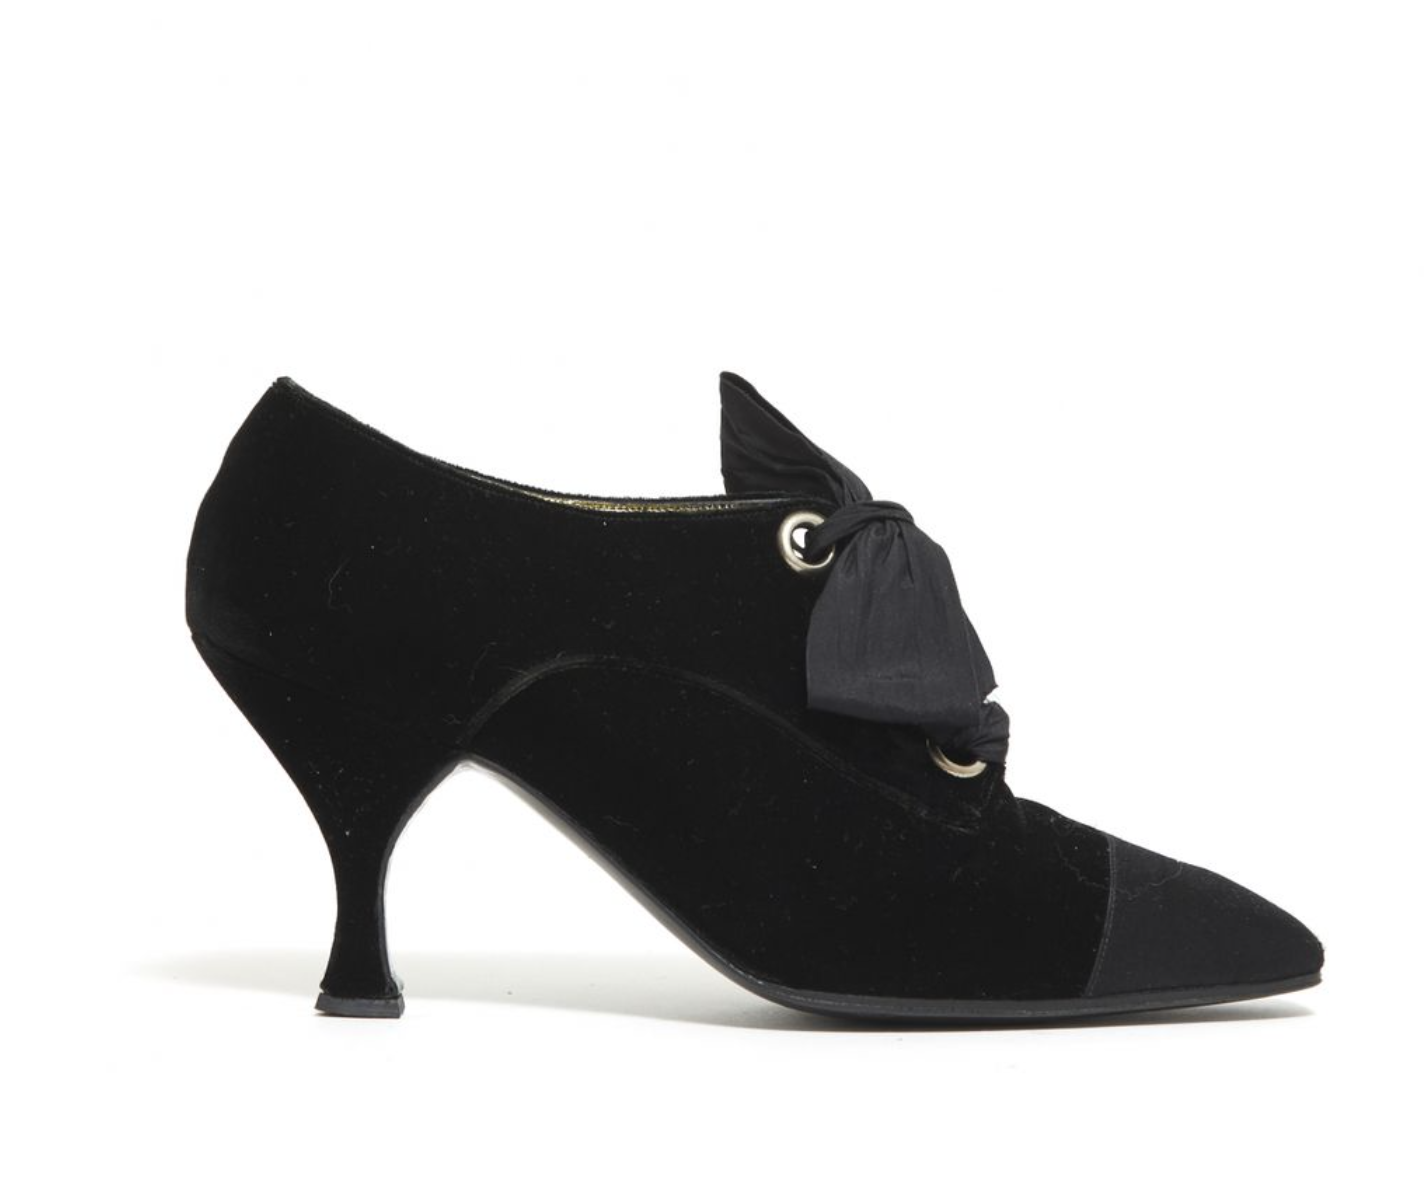 CHANEL HAUTE COUTURE BROGUE PUMPS IN SMOOTH BLACK VELVET, SATIN FRONT TOE - SIZE 26.5 FR - £345.10